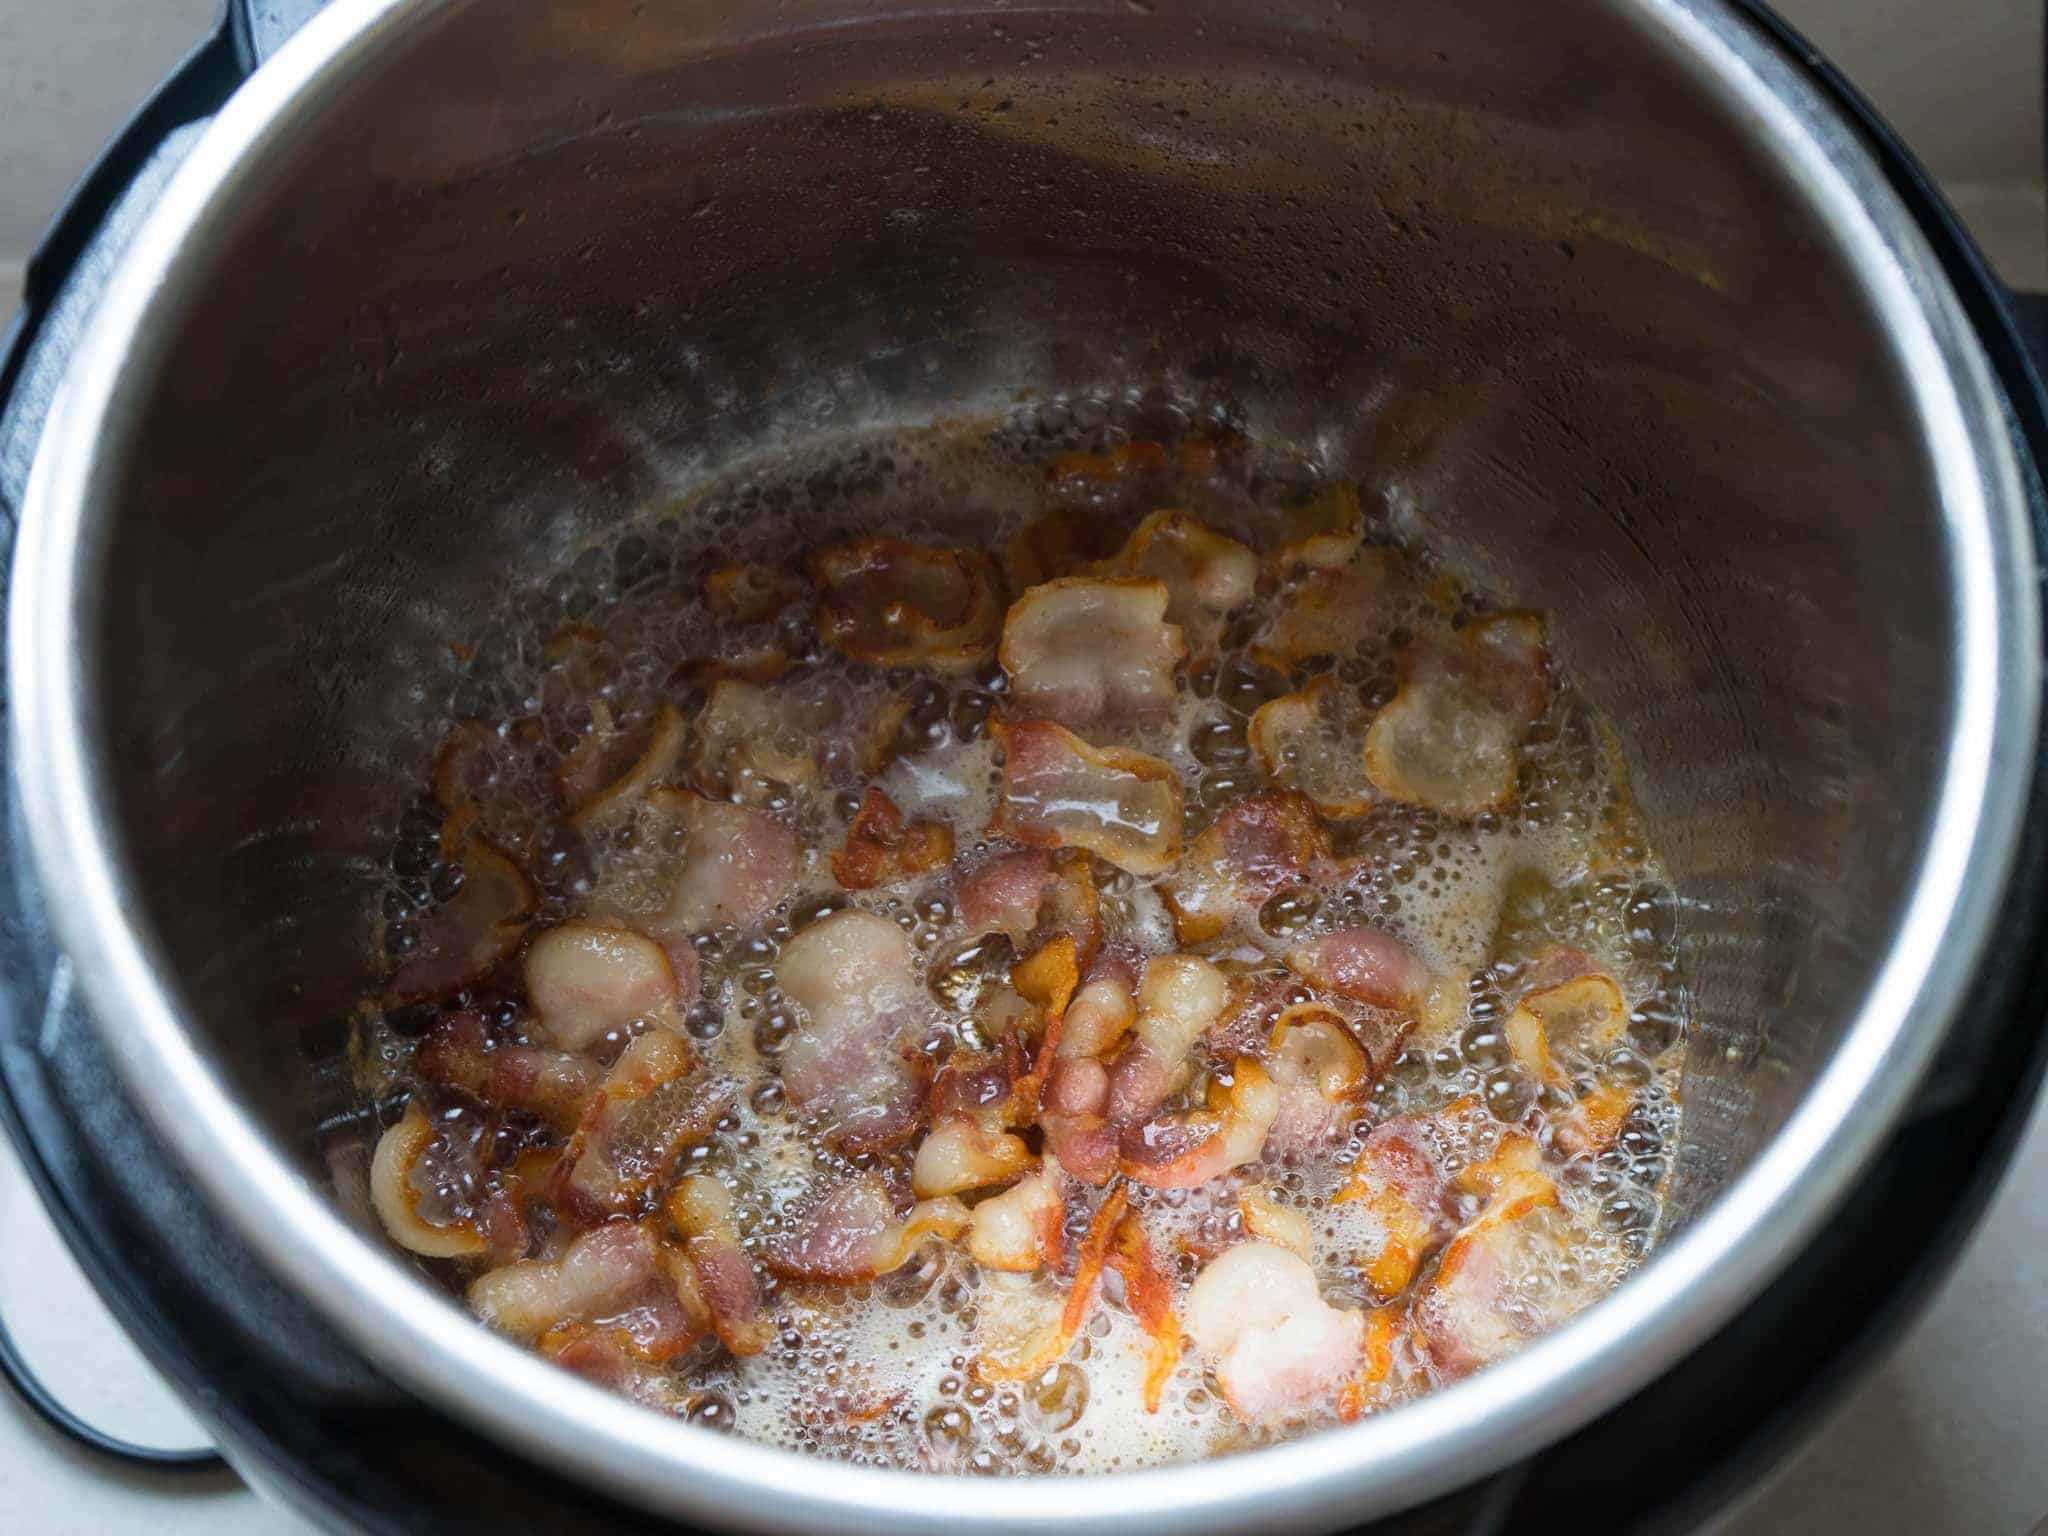 Bacon browning in an instant pot